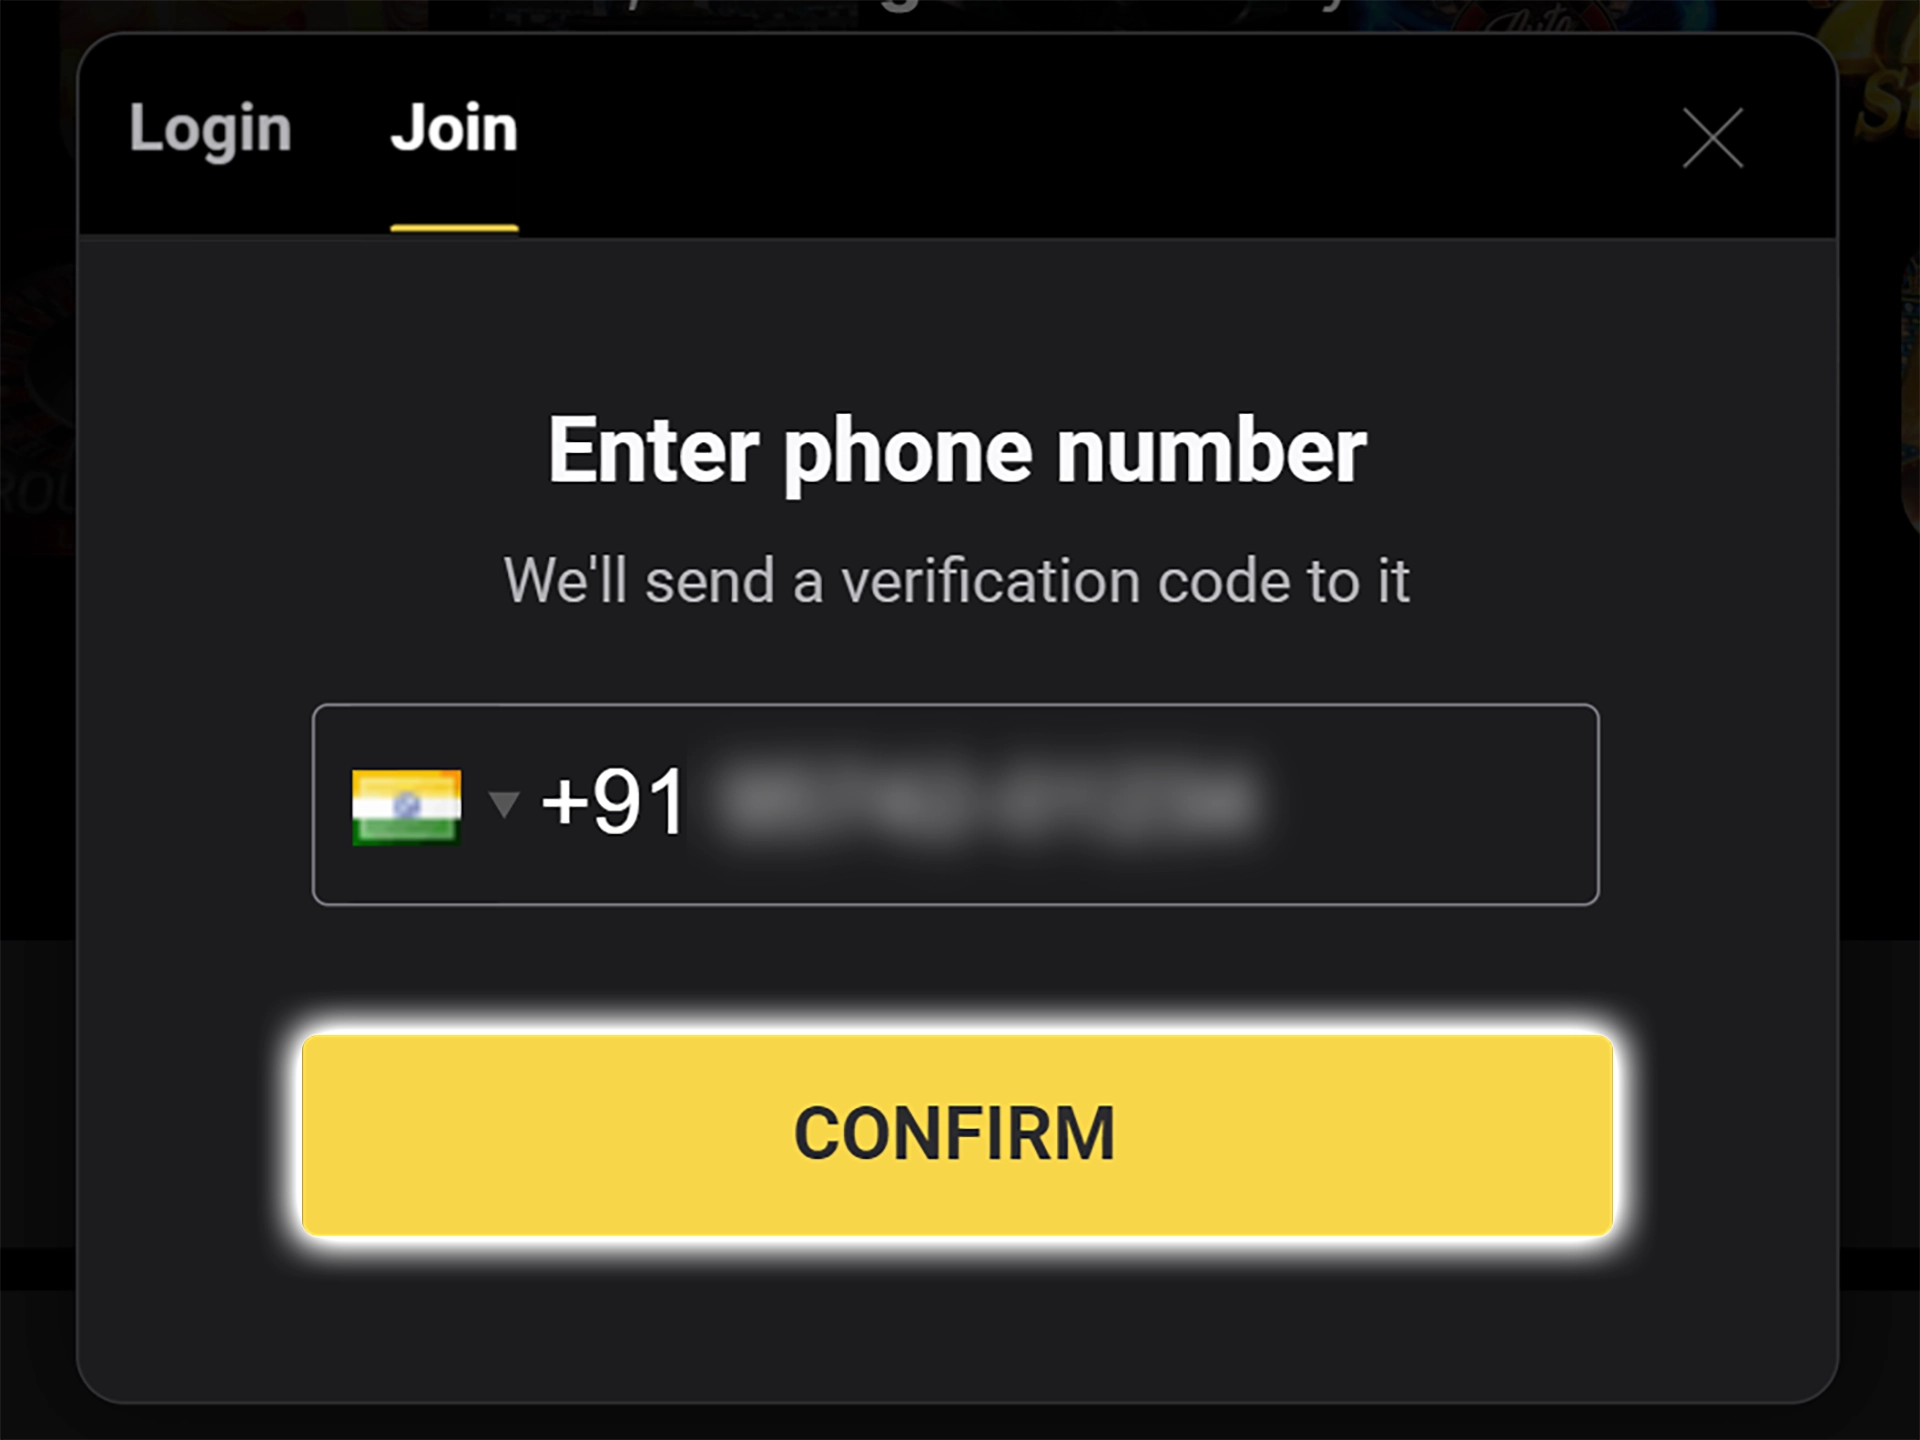 Go through the process of verifying your phone number at 24Betting.